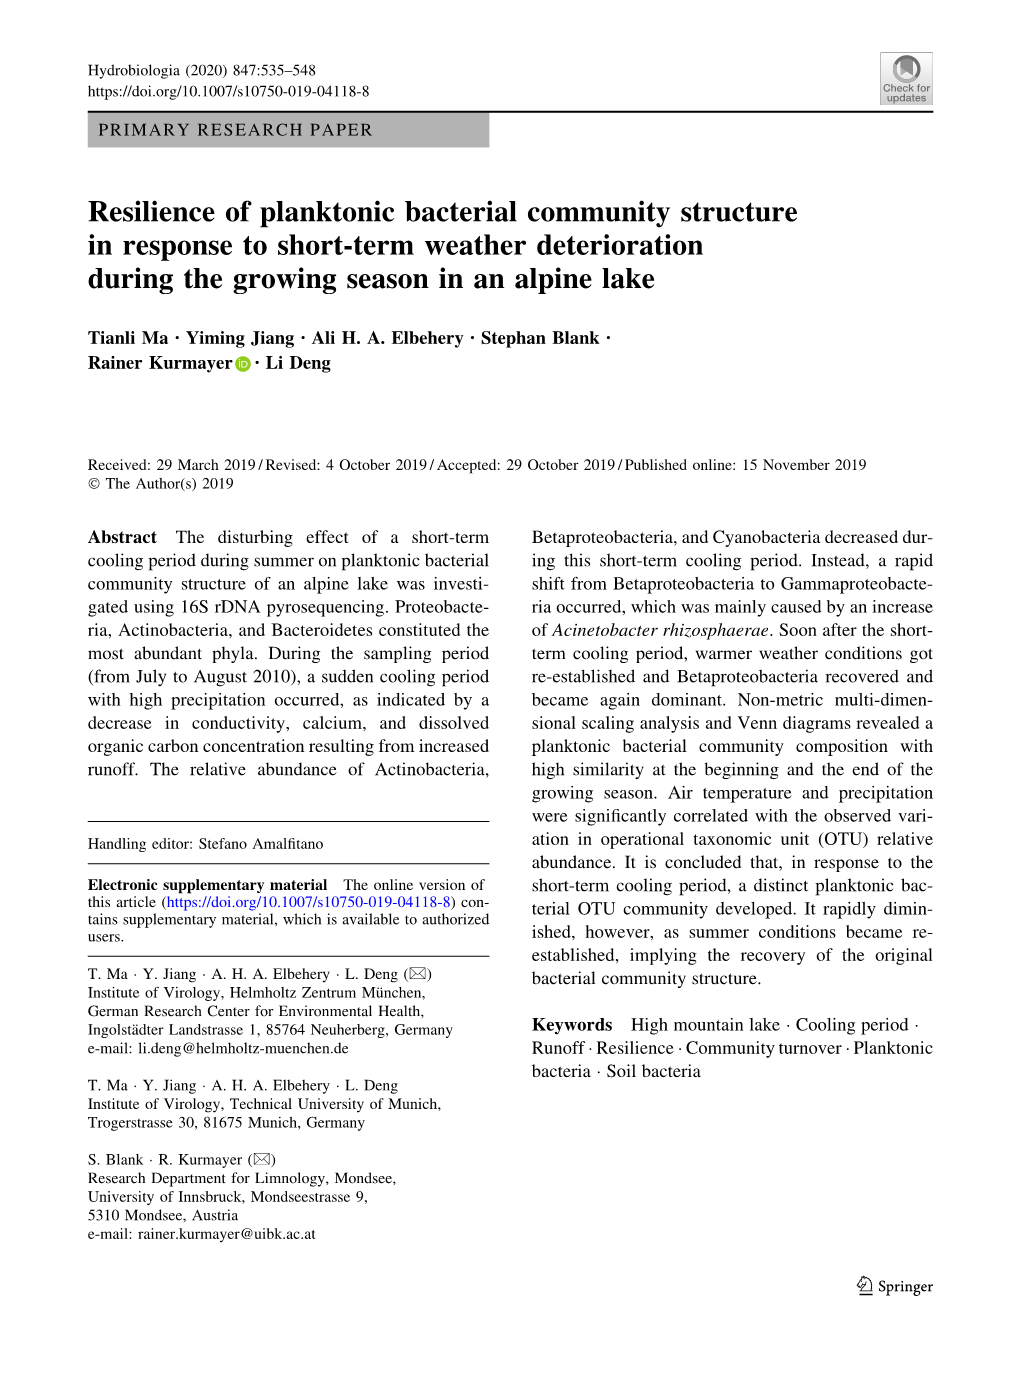 Resilience of Planktonic Bacterial Community Structure in Response to Short-Term Weather Deterioration During the Growing Season in an Alpine Lake